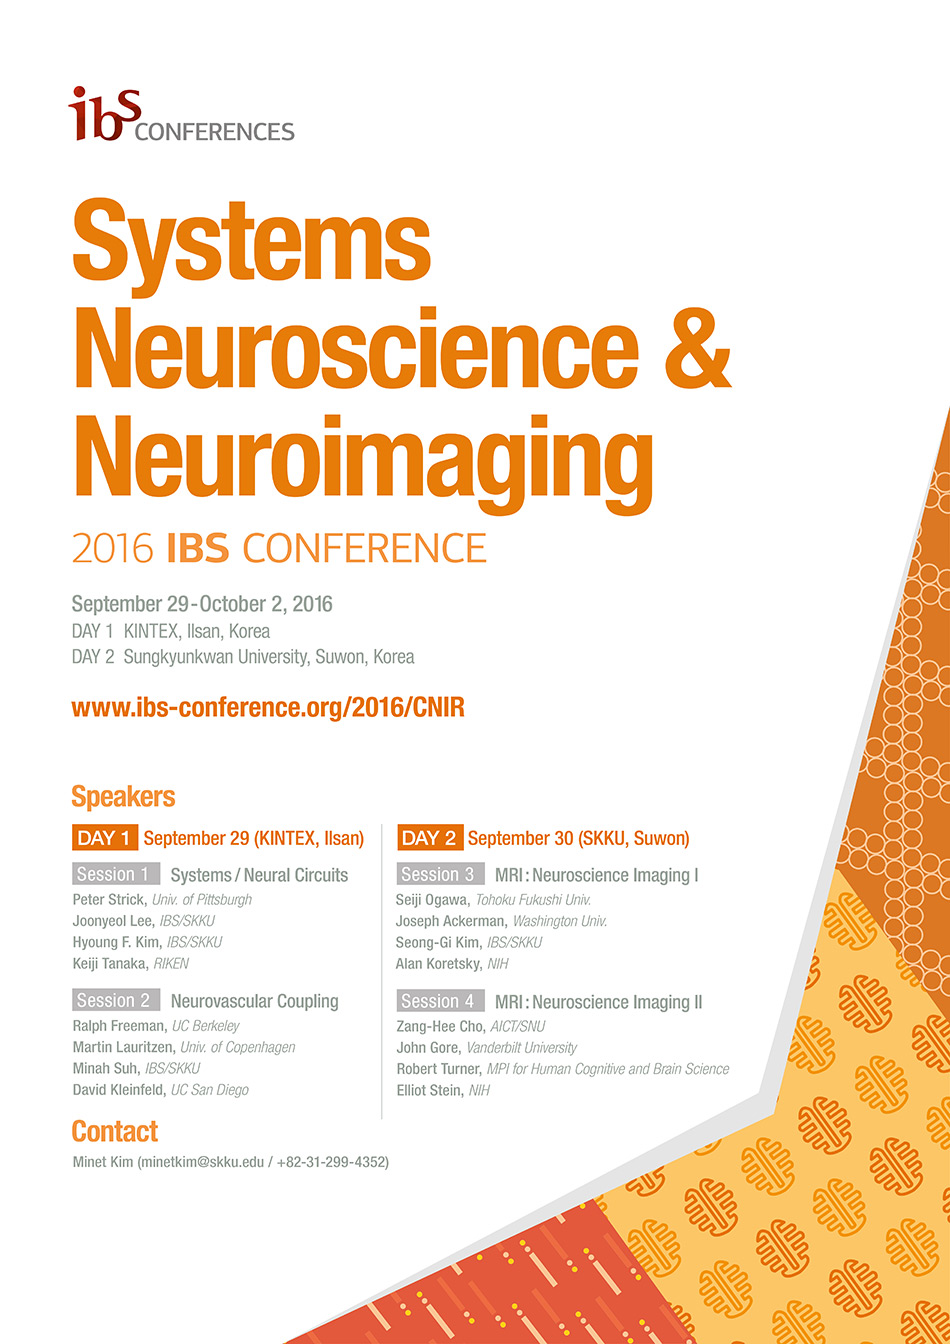 IBS Conference on Systems Neuroscience & Neuroimaging Poster